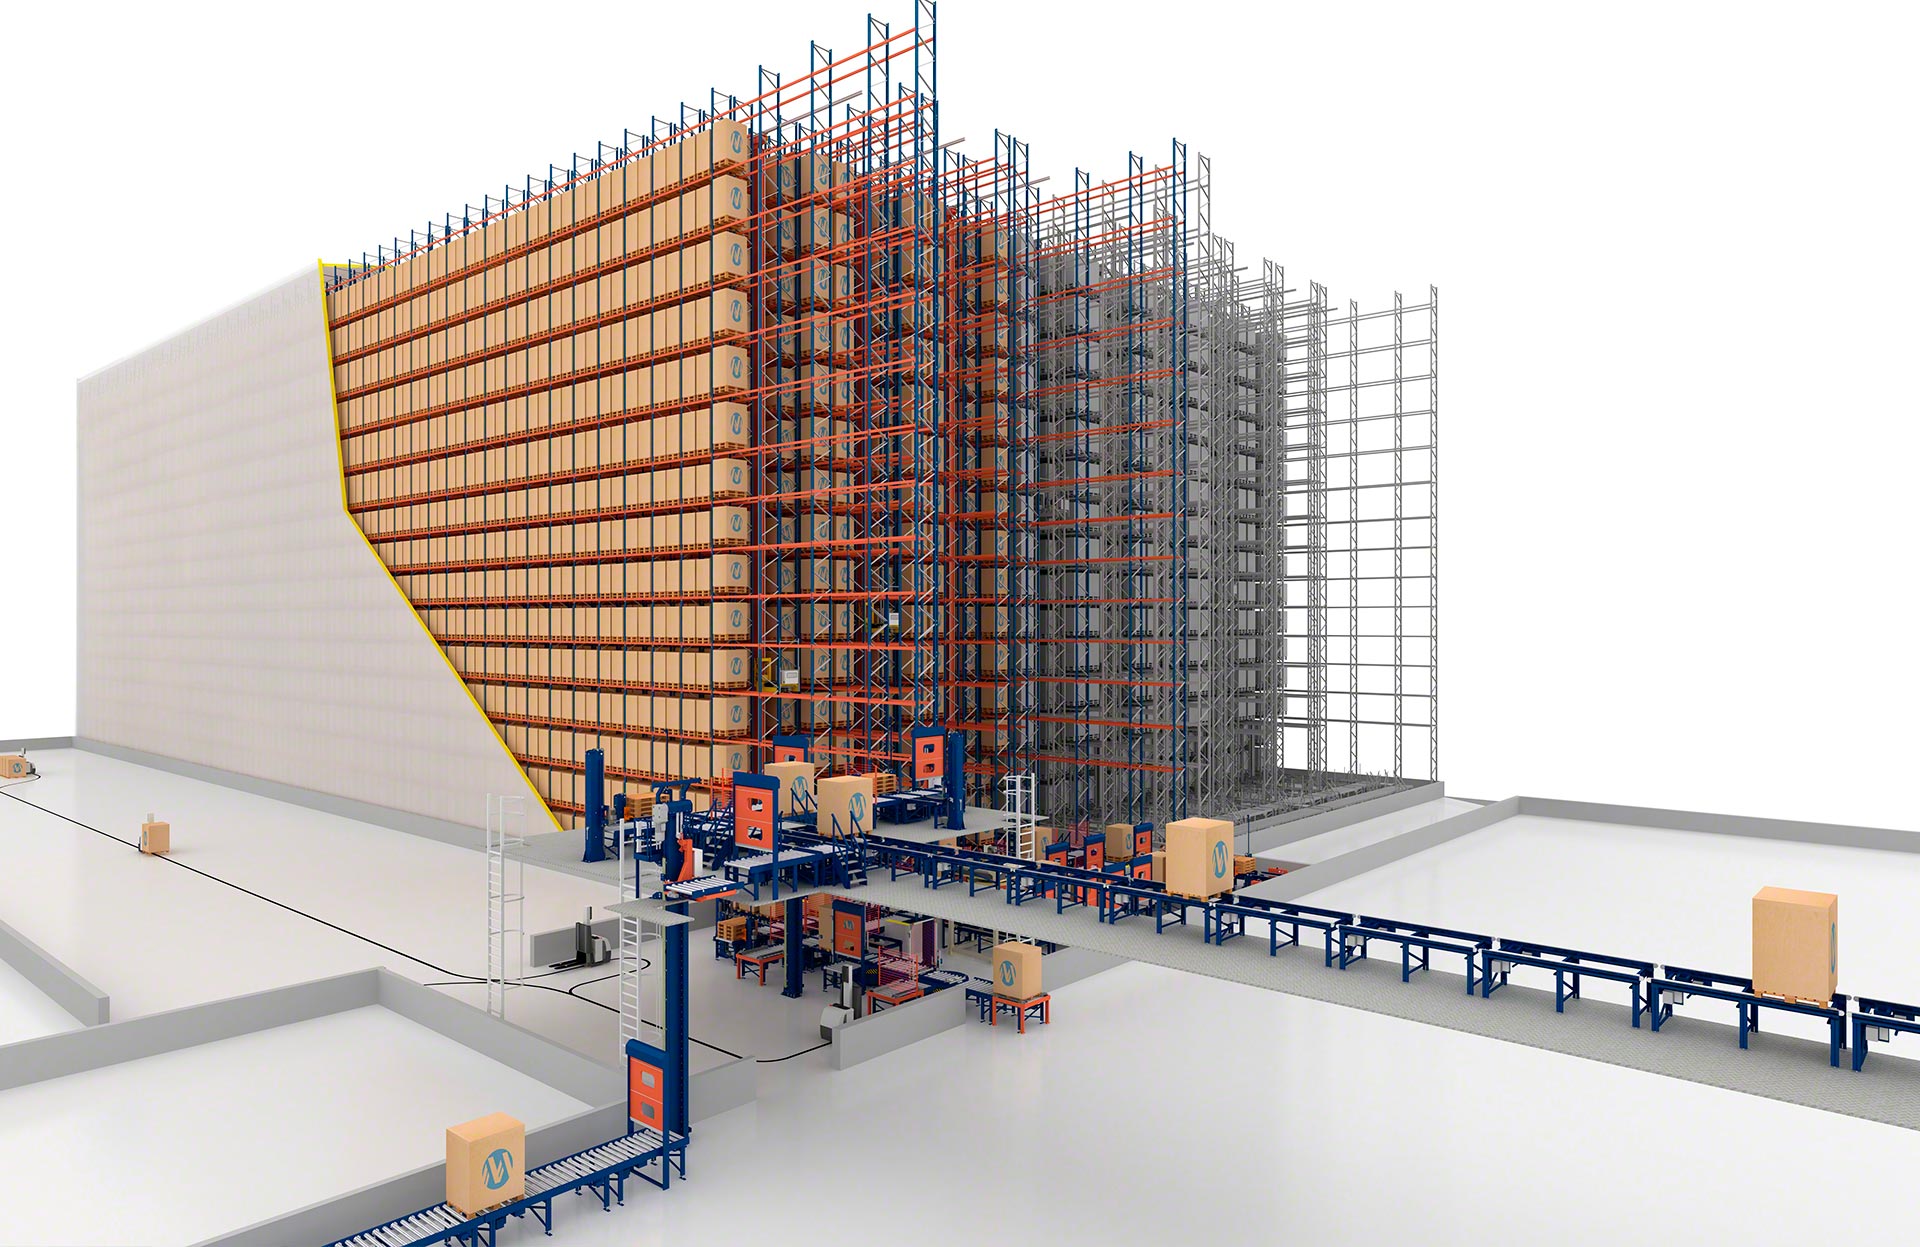 Pallet elevators can reach heights of up to 40 m